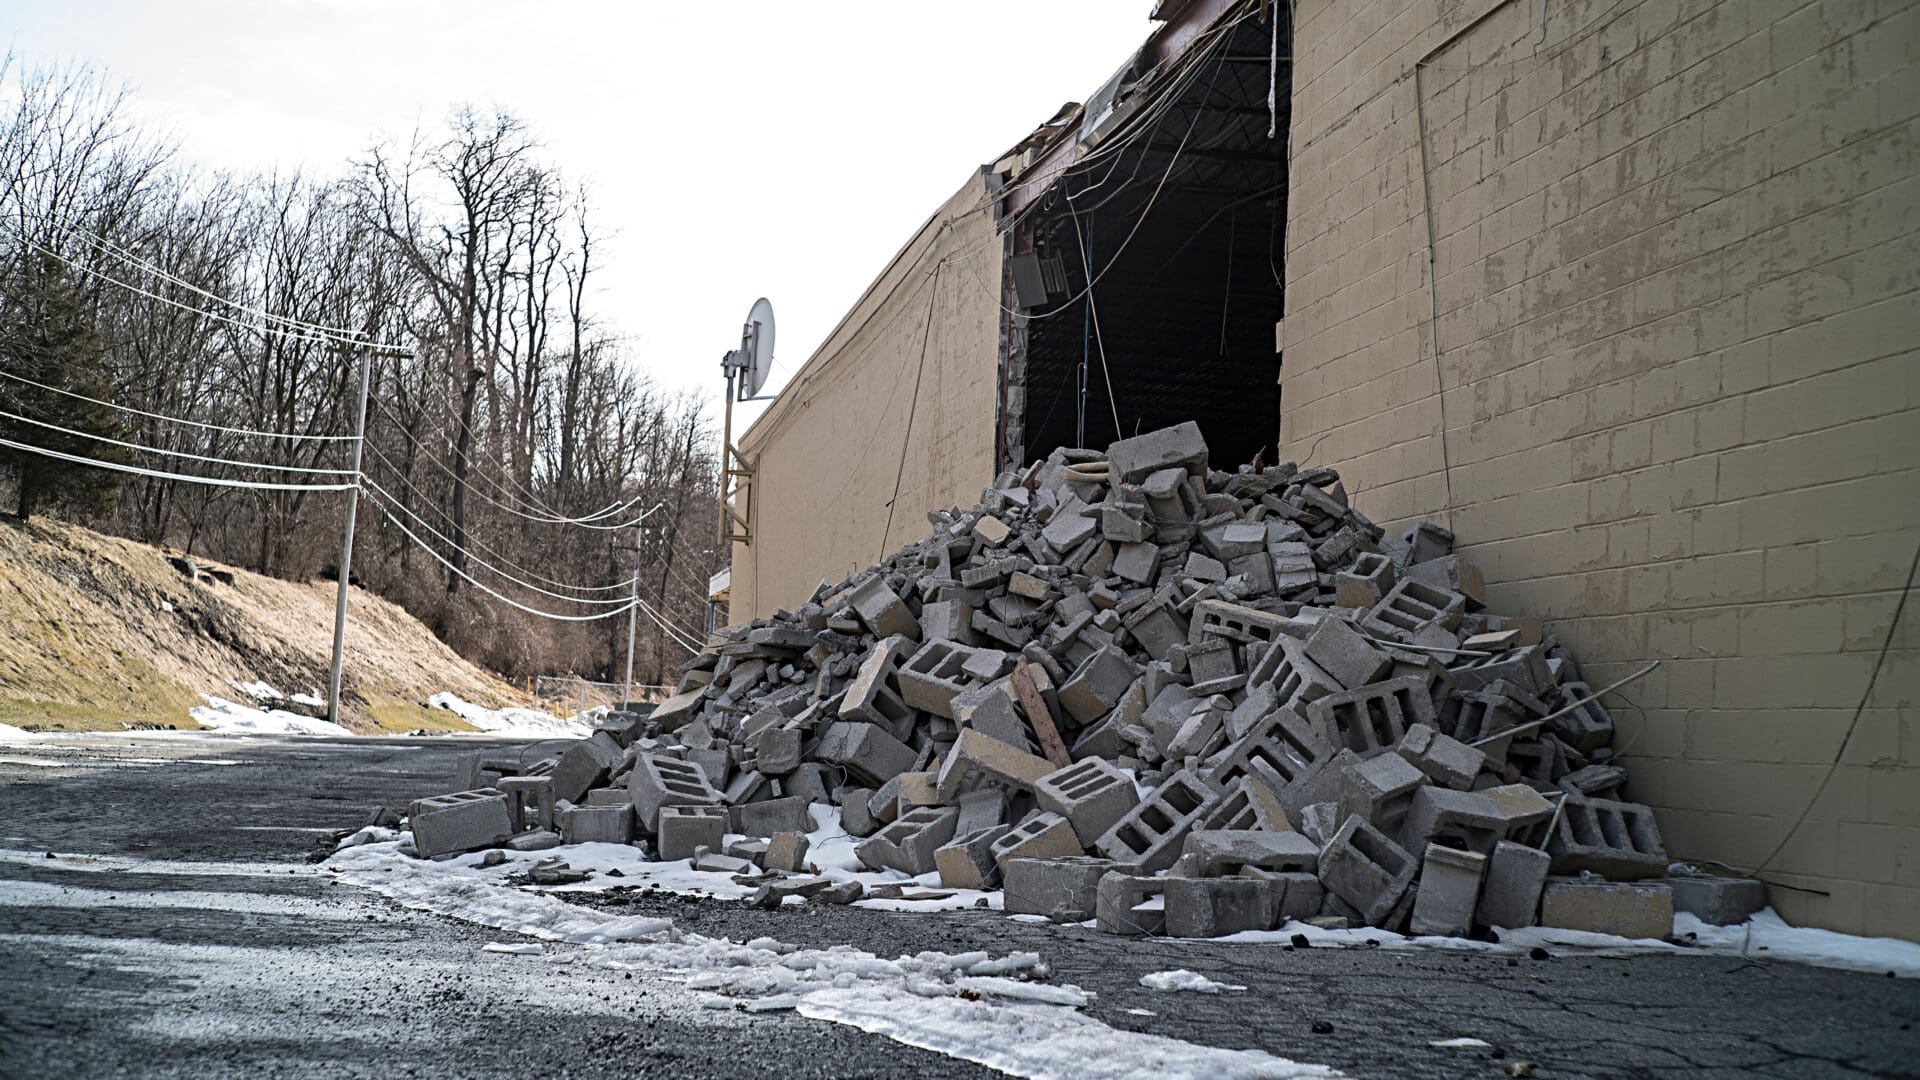 A pile of rubble is piled up against the side of a building.